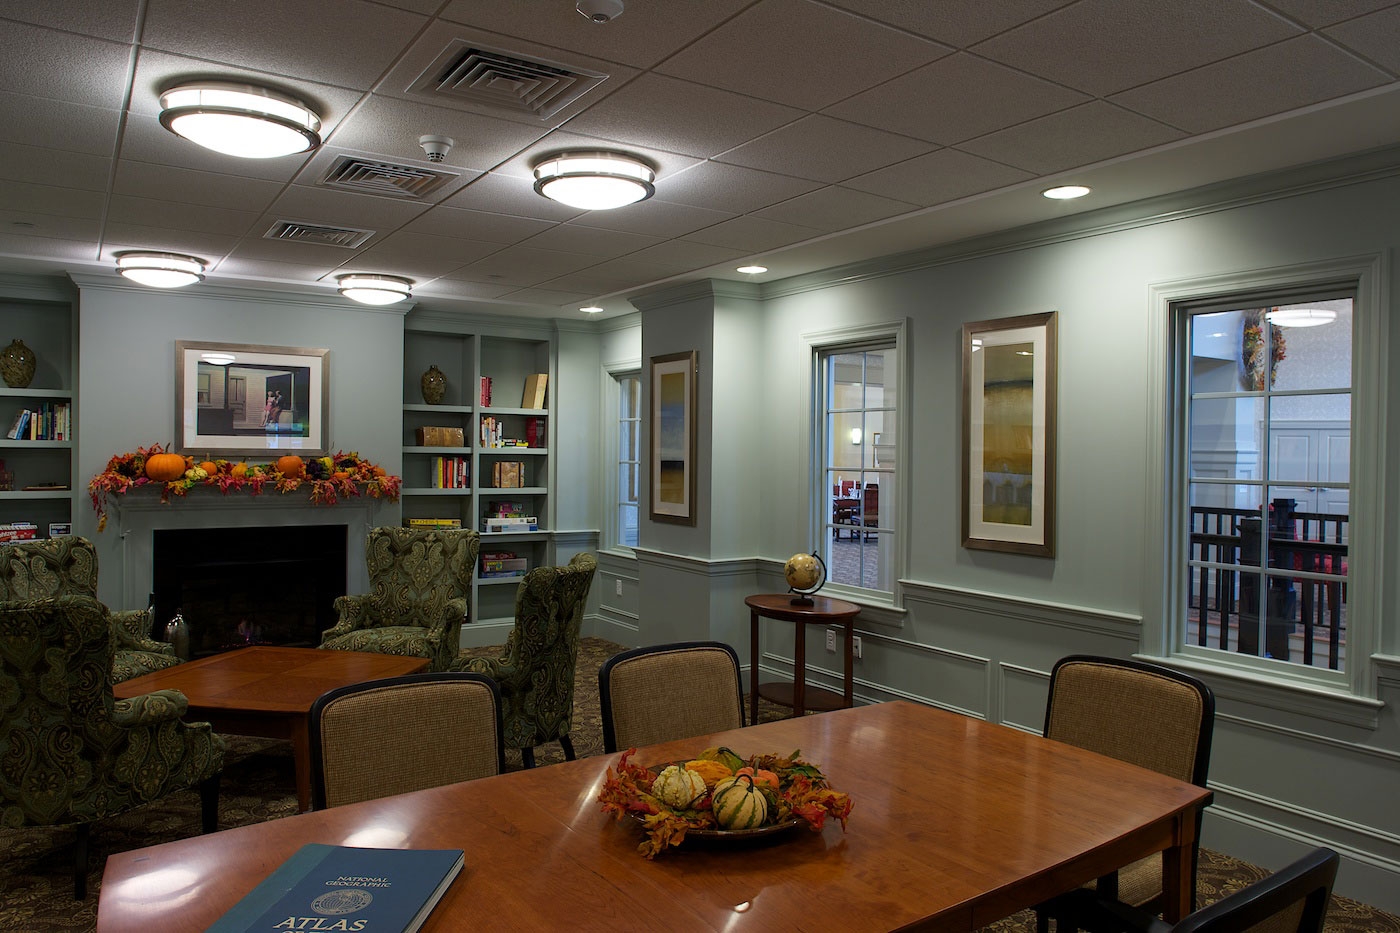 Cozy common seating area designed by WDC for this assisted living community